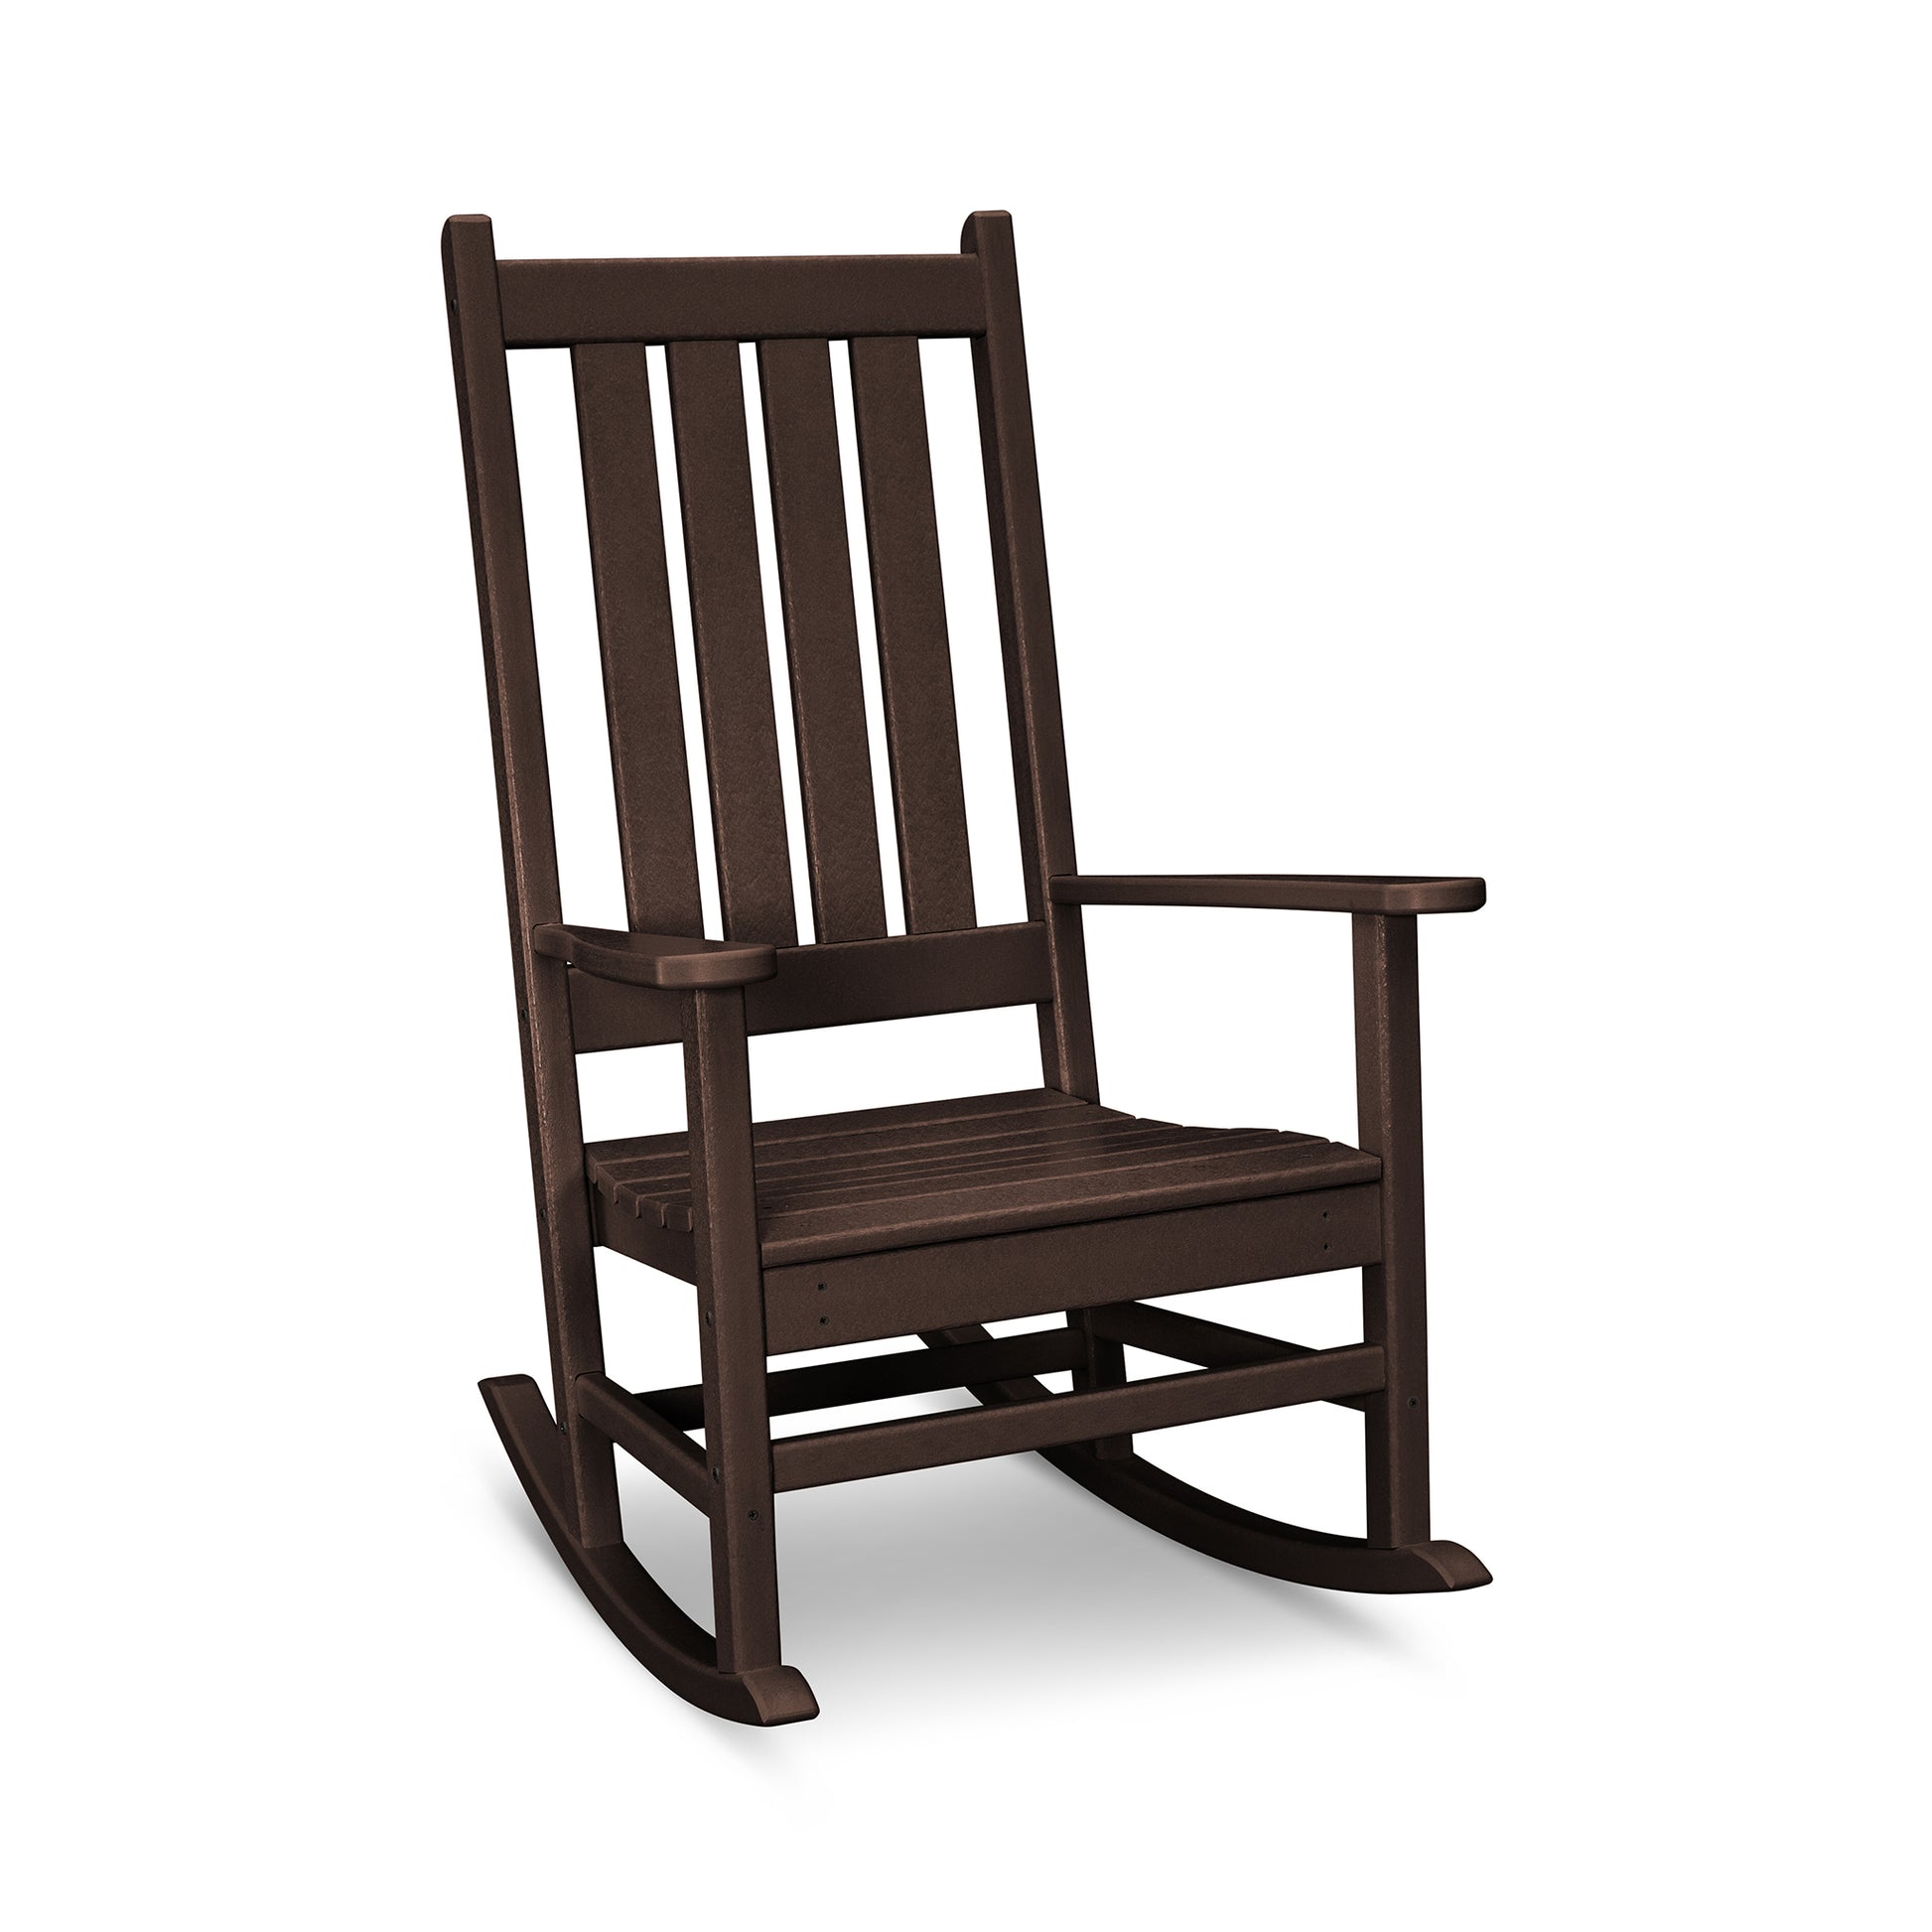 A brown POLYWOOD® Vineyard Porch Rocking Chair with a high back and armrests, featuring outdoor durability, isolated on a white background.